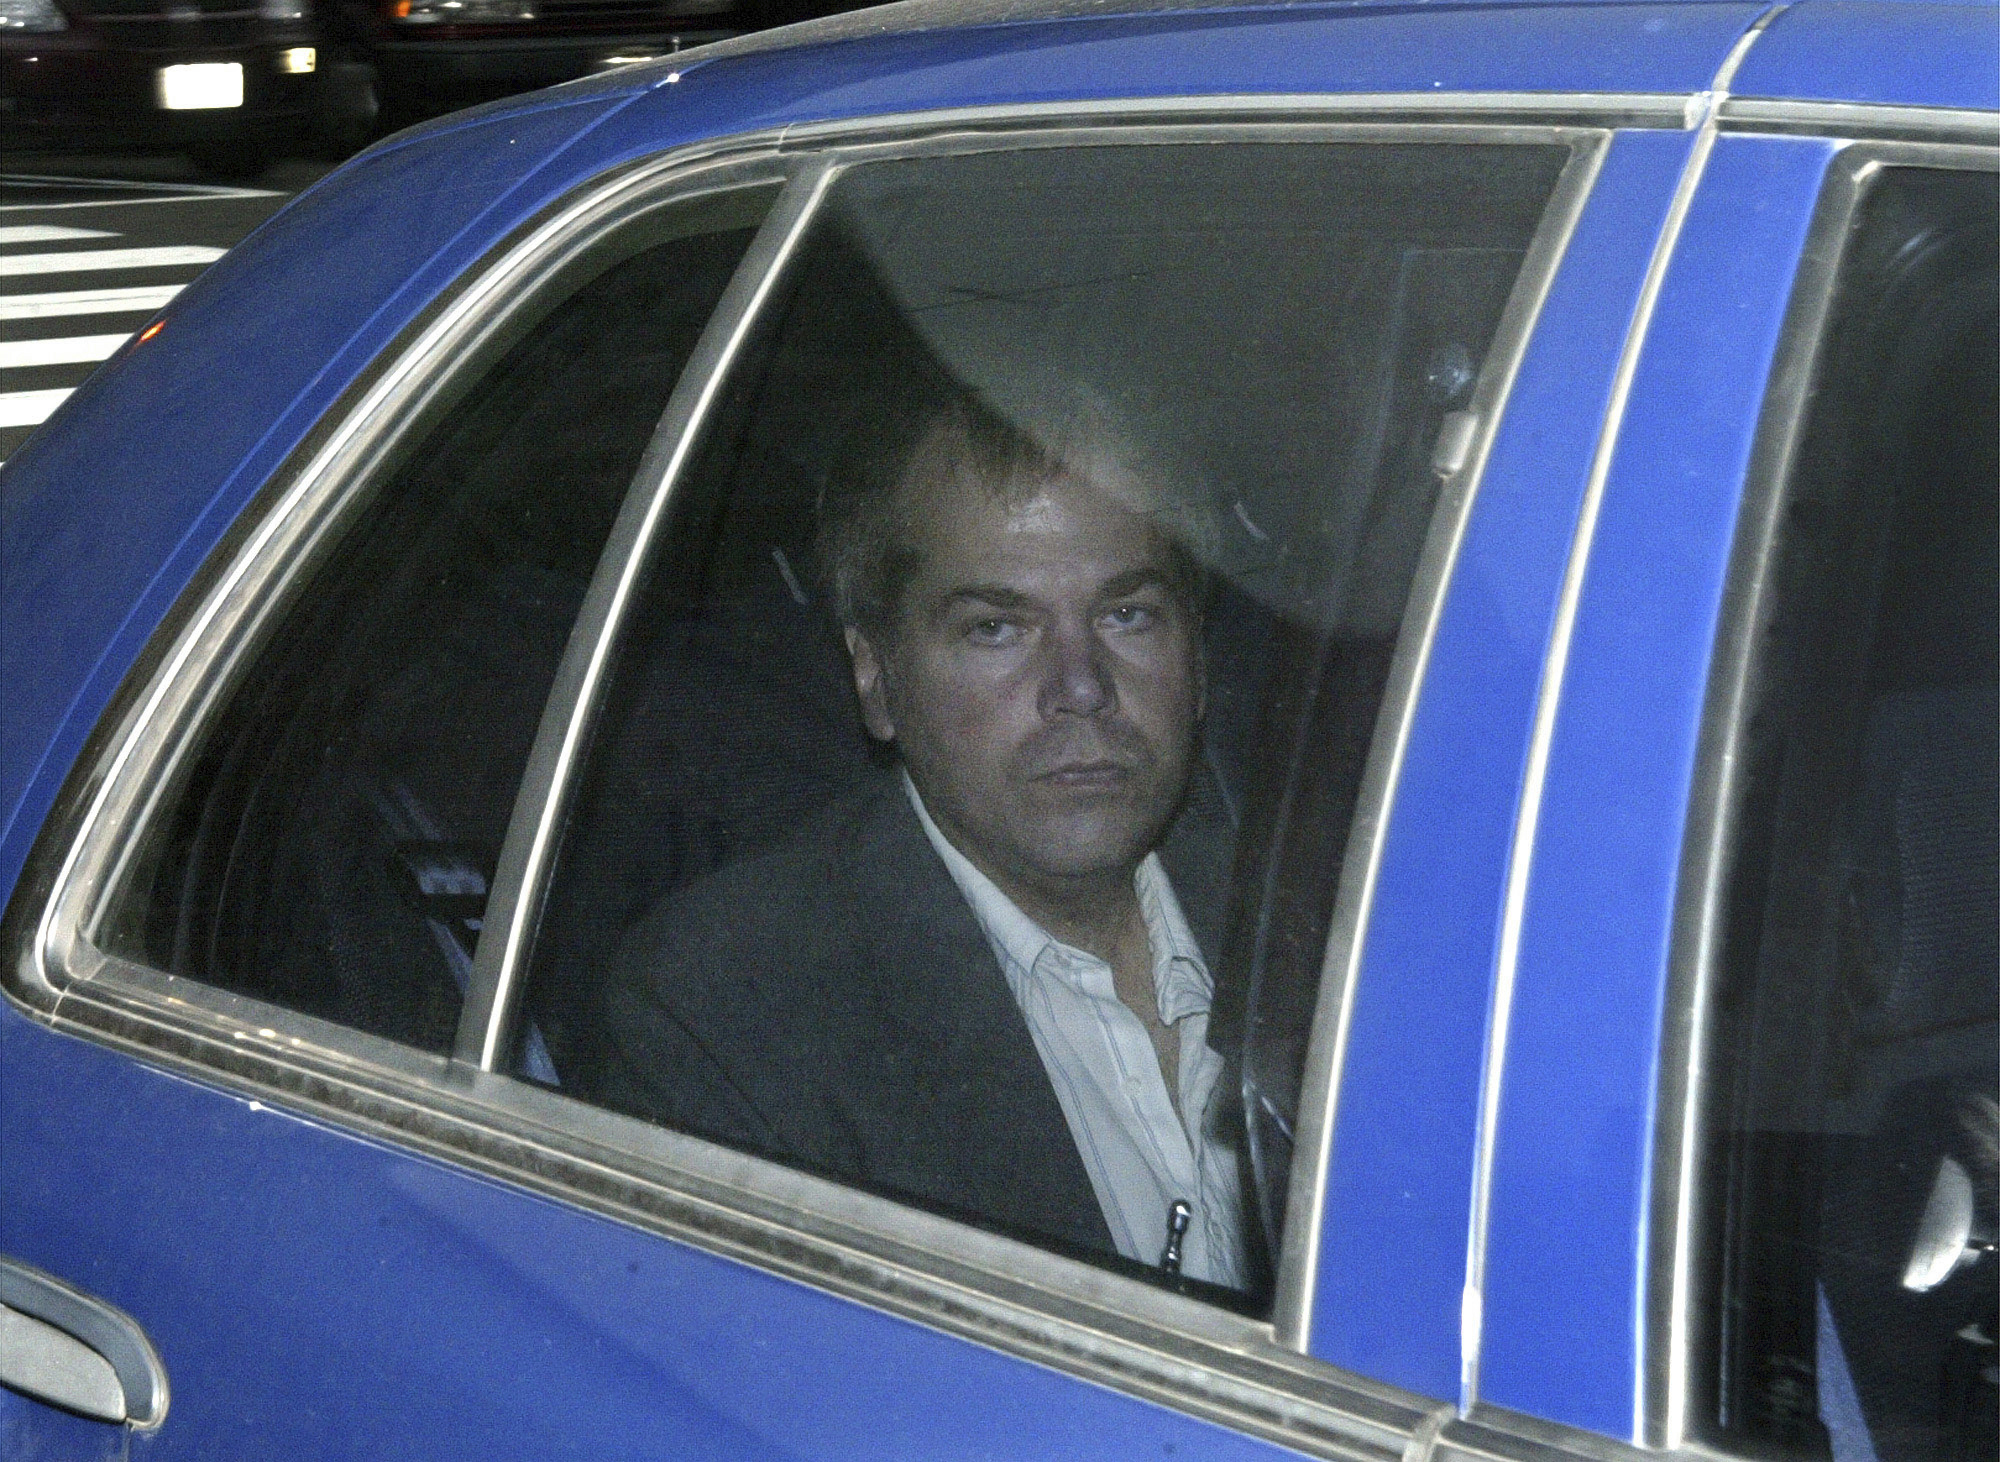 FILE - In this Nov. 18, 2003, file photo, John Hinckley Jr. arrives at U.S. District Court in Washington. Lawyers for Hinckley, the man who tried to assassinate President Ronald Reagan, are scheduled to argue in court Monday, Sept. 27, 2021, that the 66-year-old should be freed from restrictions placed on him after he moved out of a Washington hospital in 2016. (AP Photo/Evan Vucci, File)